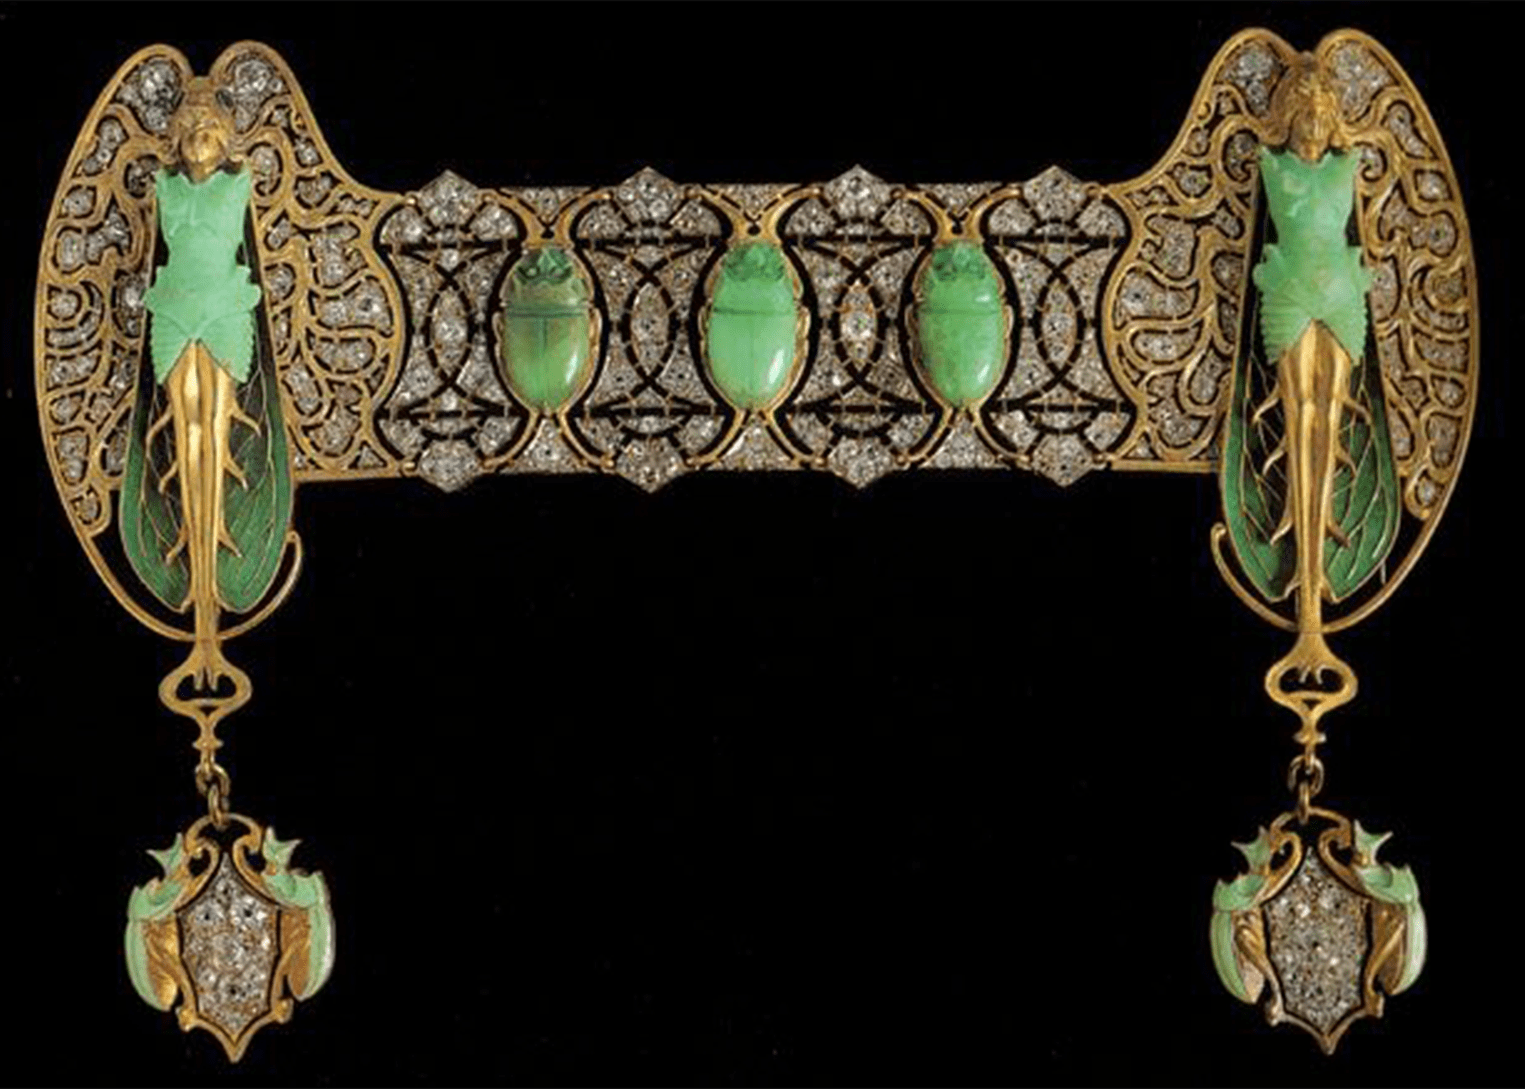 brooch by Rene Lalique